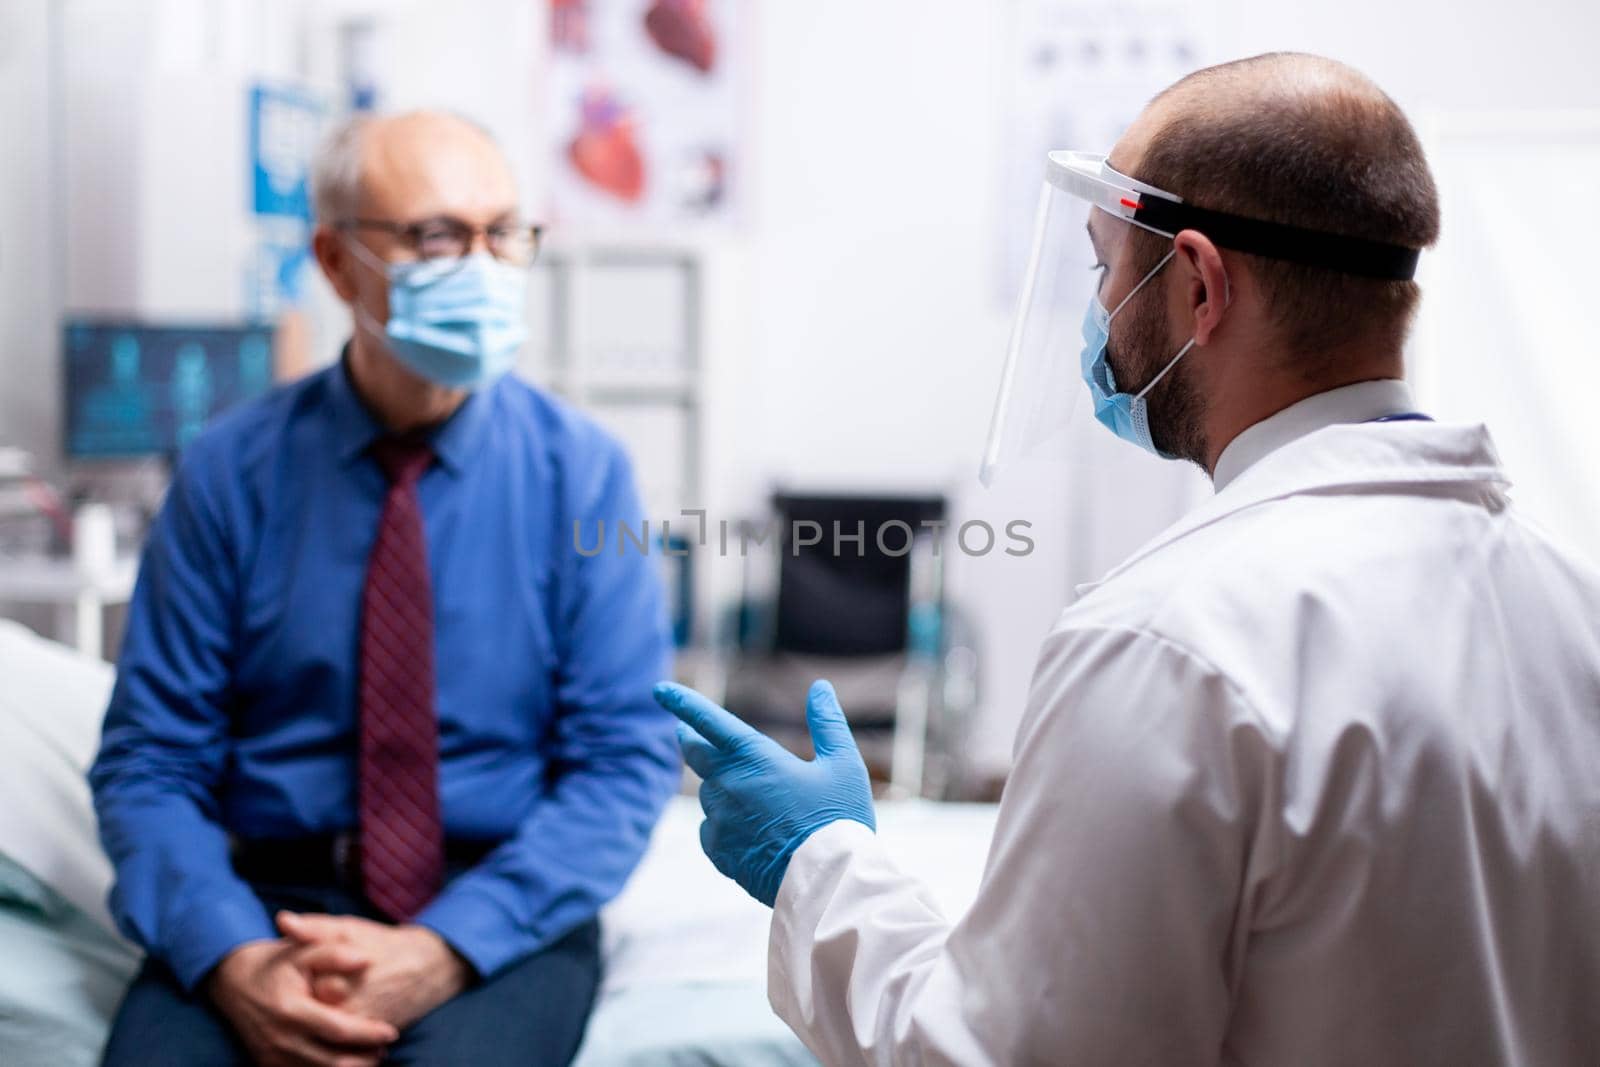 Senior man with face mask agasint covid dicussing treatment with doctor in clinic cabinet. Global health crisis, medical system during pandemic, sick elderly patient in private hospital.